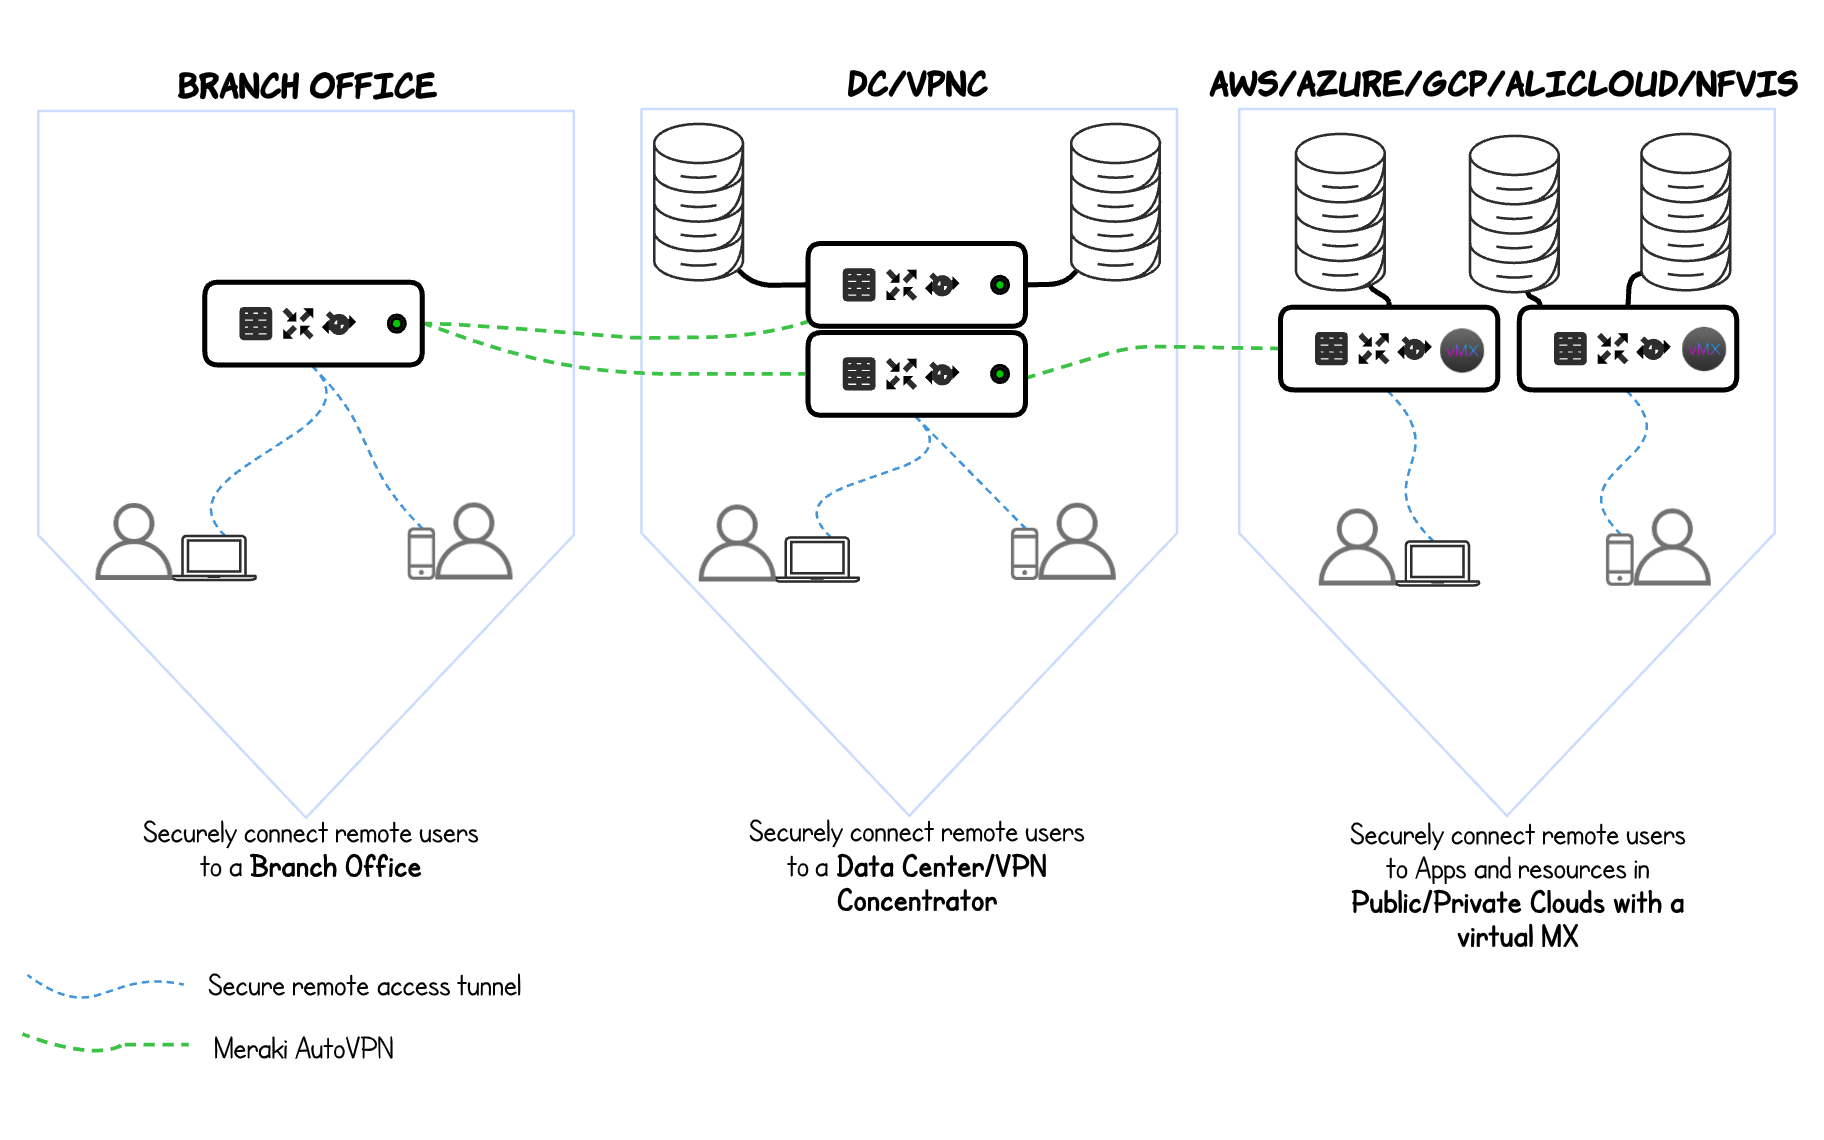 Diagram illustrating use cases for AnyConnect at a branch office, Data Center/VPN Concentrator, or public and private cloud environments.